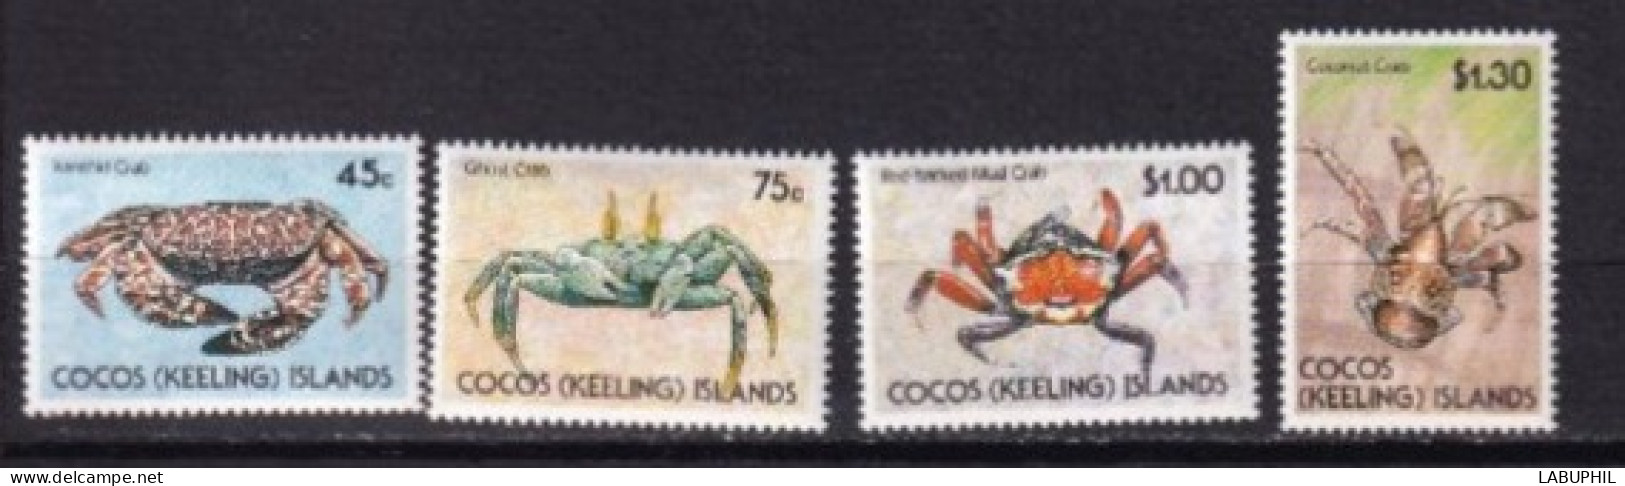 COCOS MNH **  1990 Faune Crabes - Cocos (Keeling) Islands